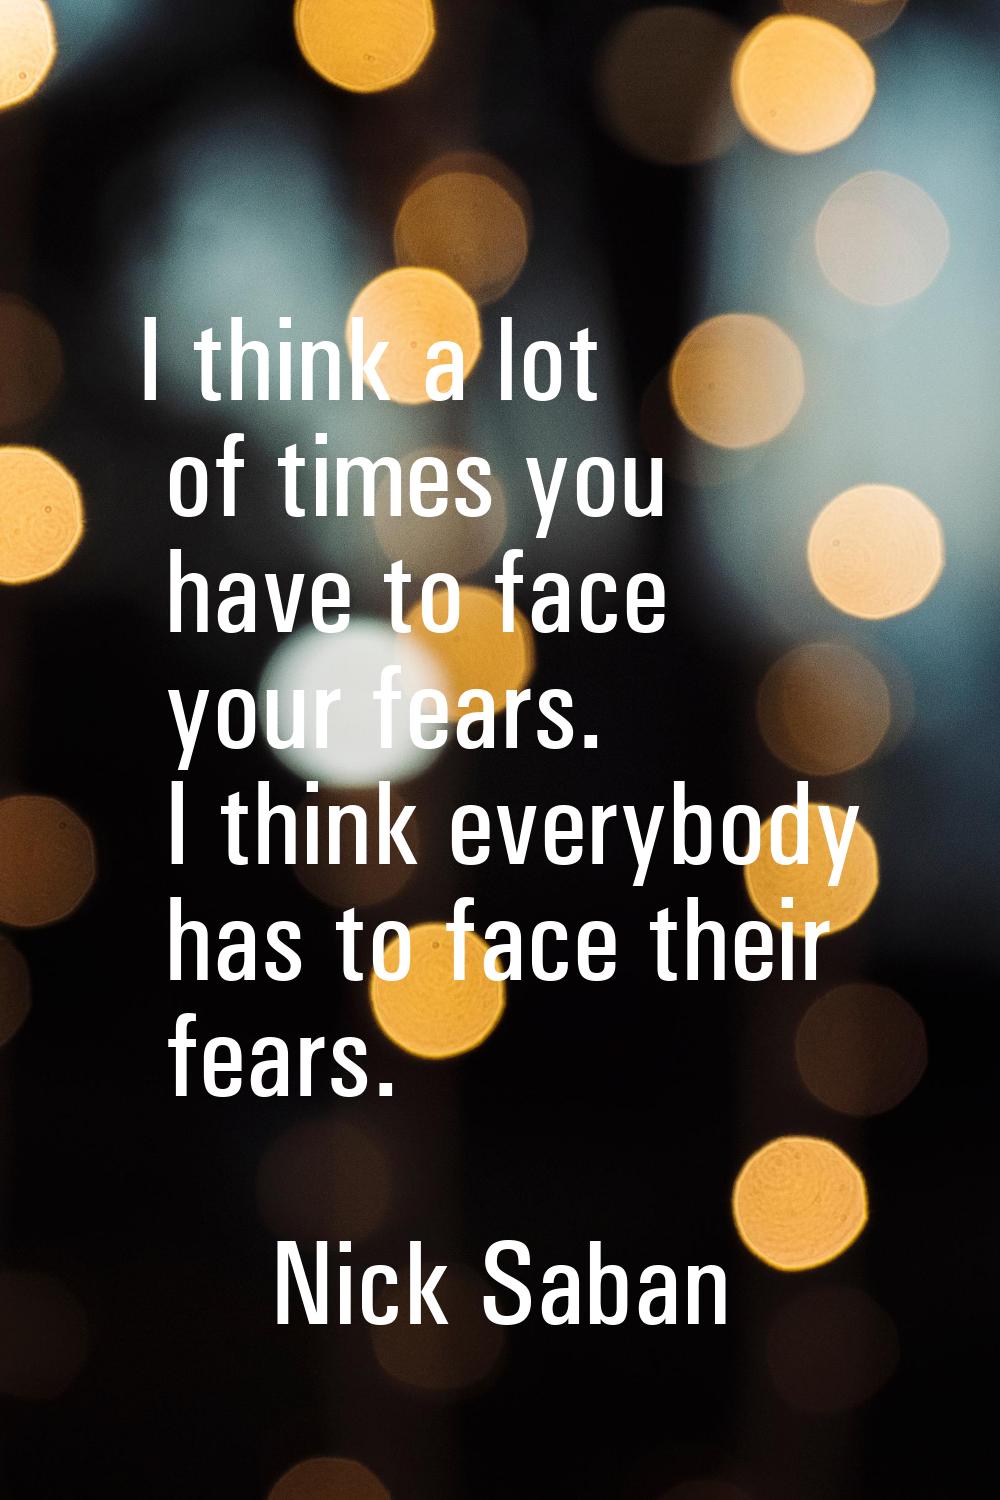 I think a lot of times you have to face your fears. I think everybody has to face their fears.